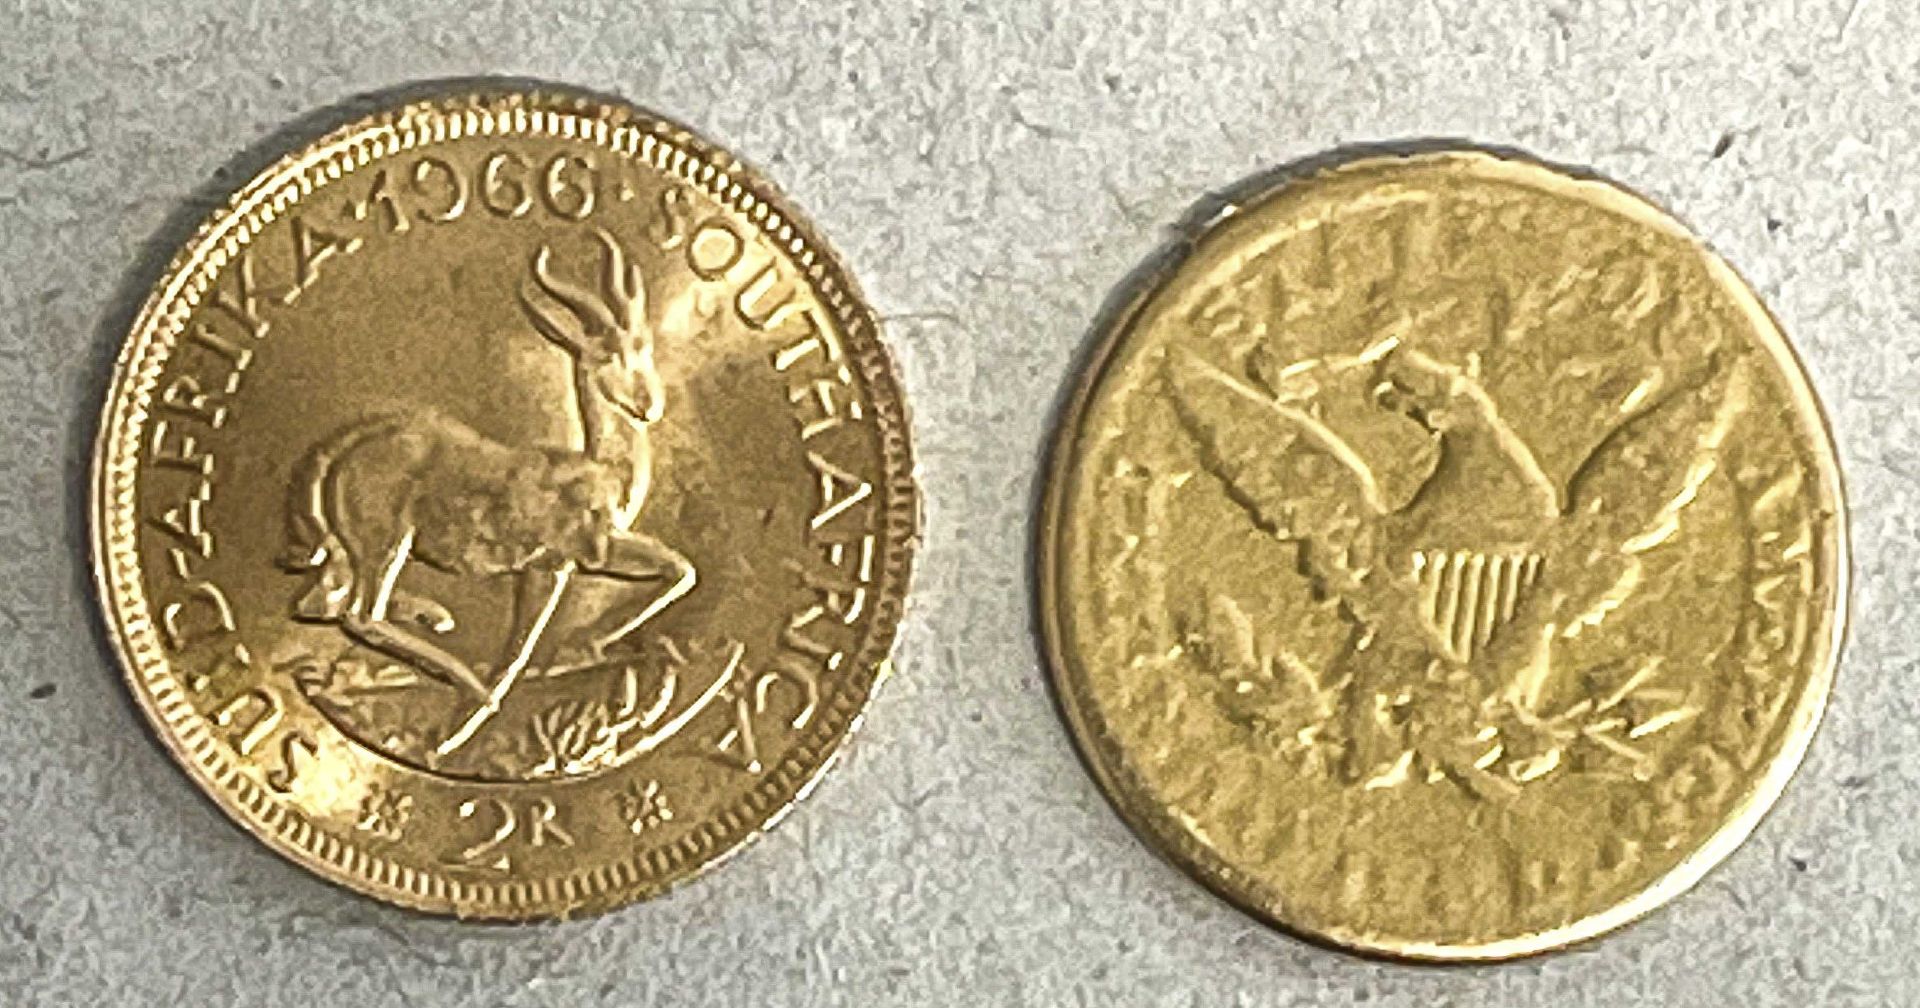 2 gold coins: 1x South Africa, 2 Rand, bust Jan van Riebeck, inscription Unity is strength Eendrag - Image 2 of 2